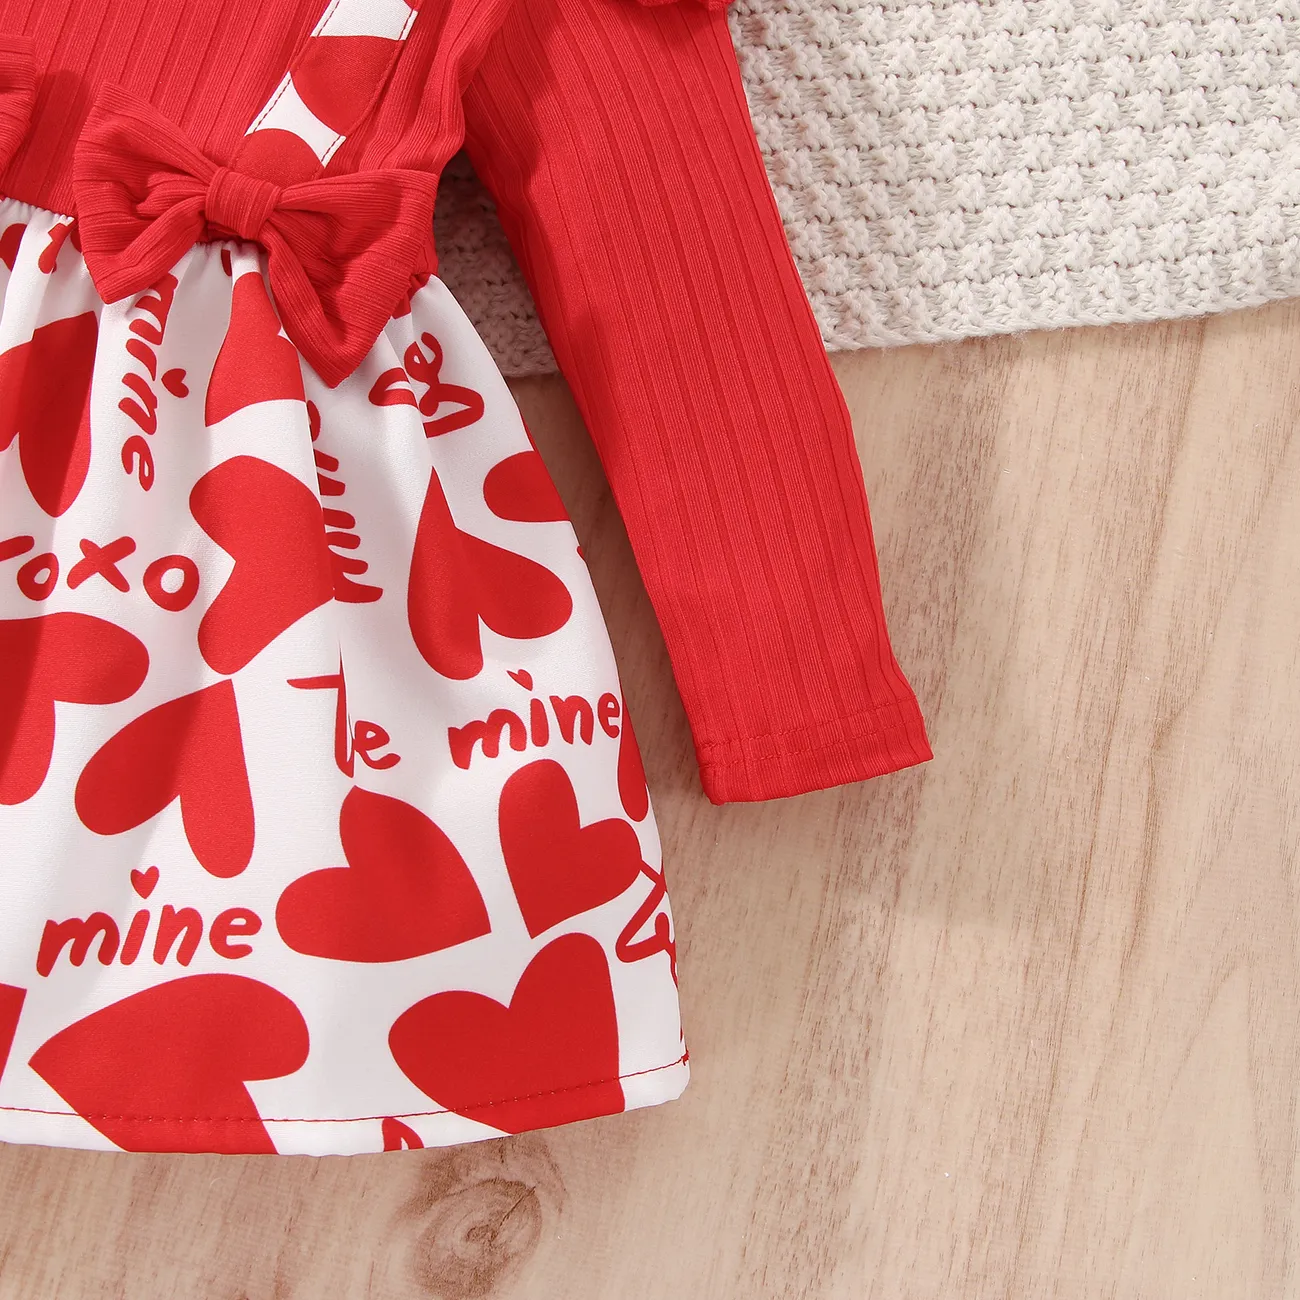 2pcs Baby Girl Red Ribbed Ruffle Long-sleeve Spliced Heart & Letter Print Dress with Headband Set Red big image 1